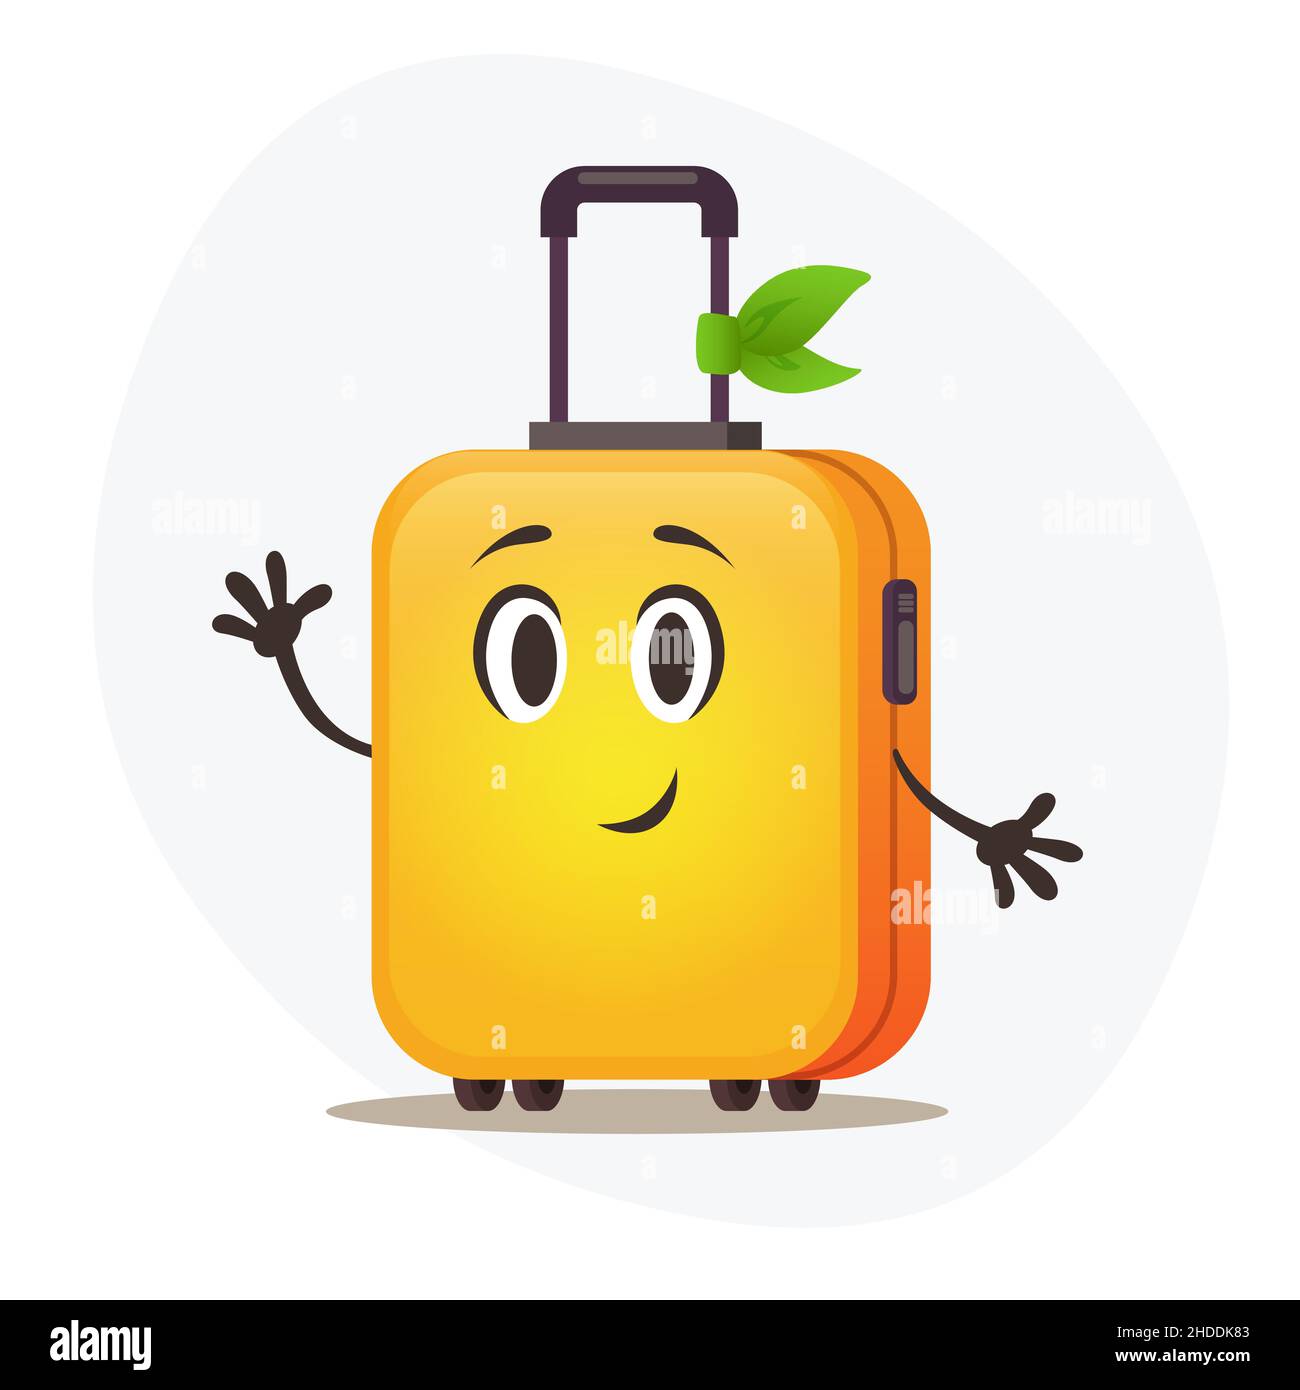 Big yellow plastic suitcase on wheels and with telescopic handle waitng vacation.Large travel bag. Stock Vector